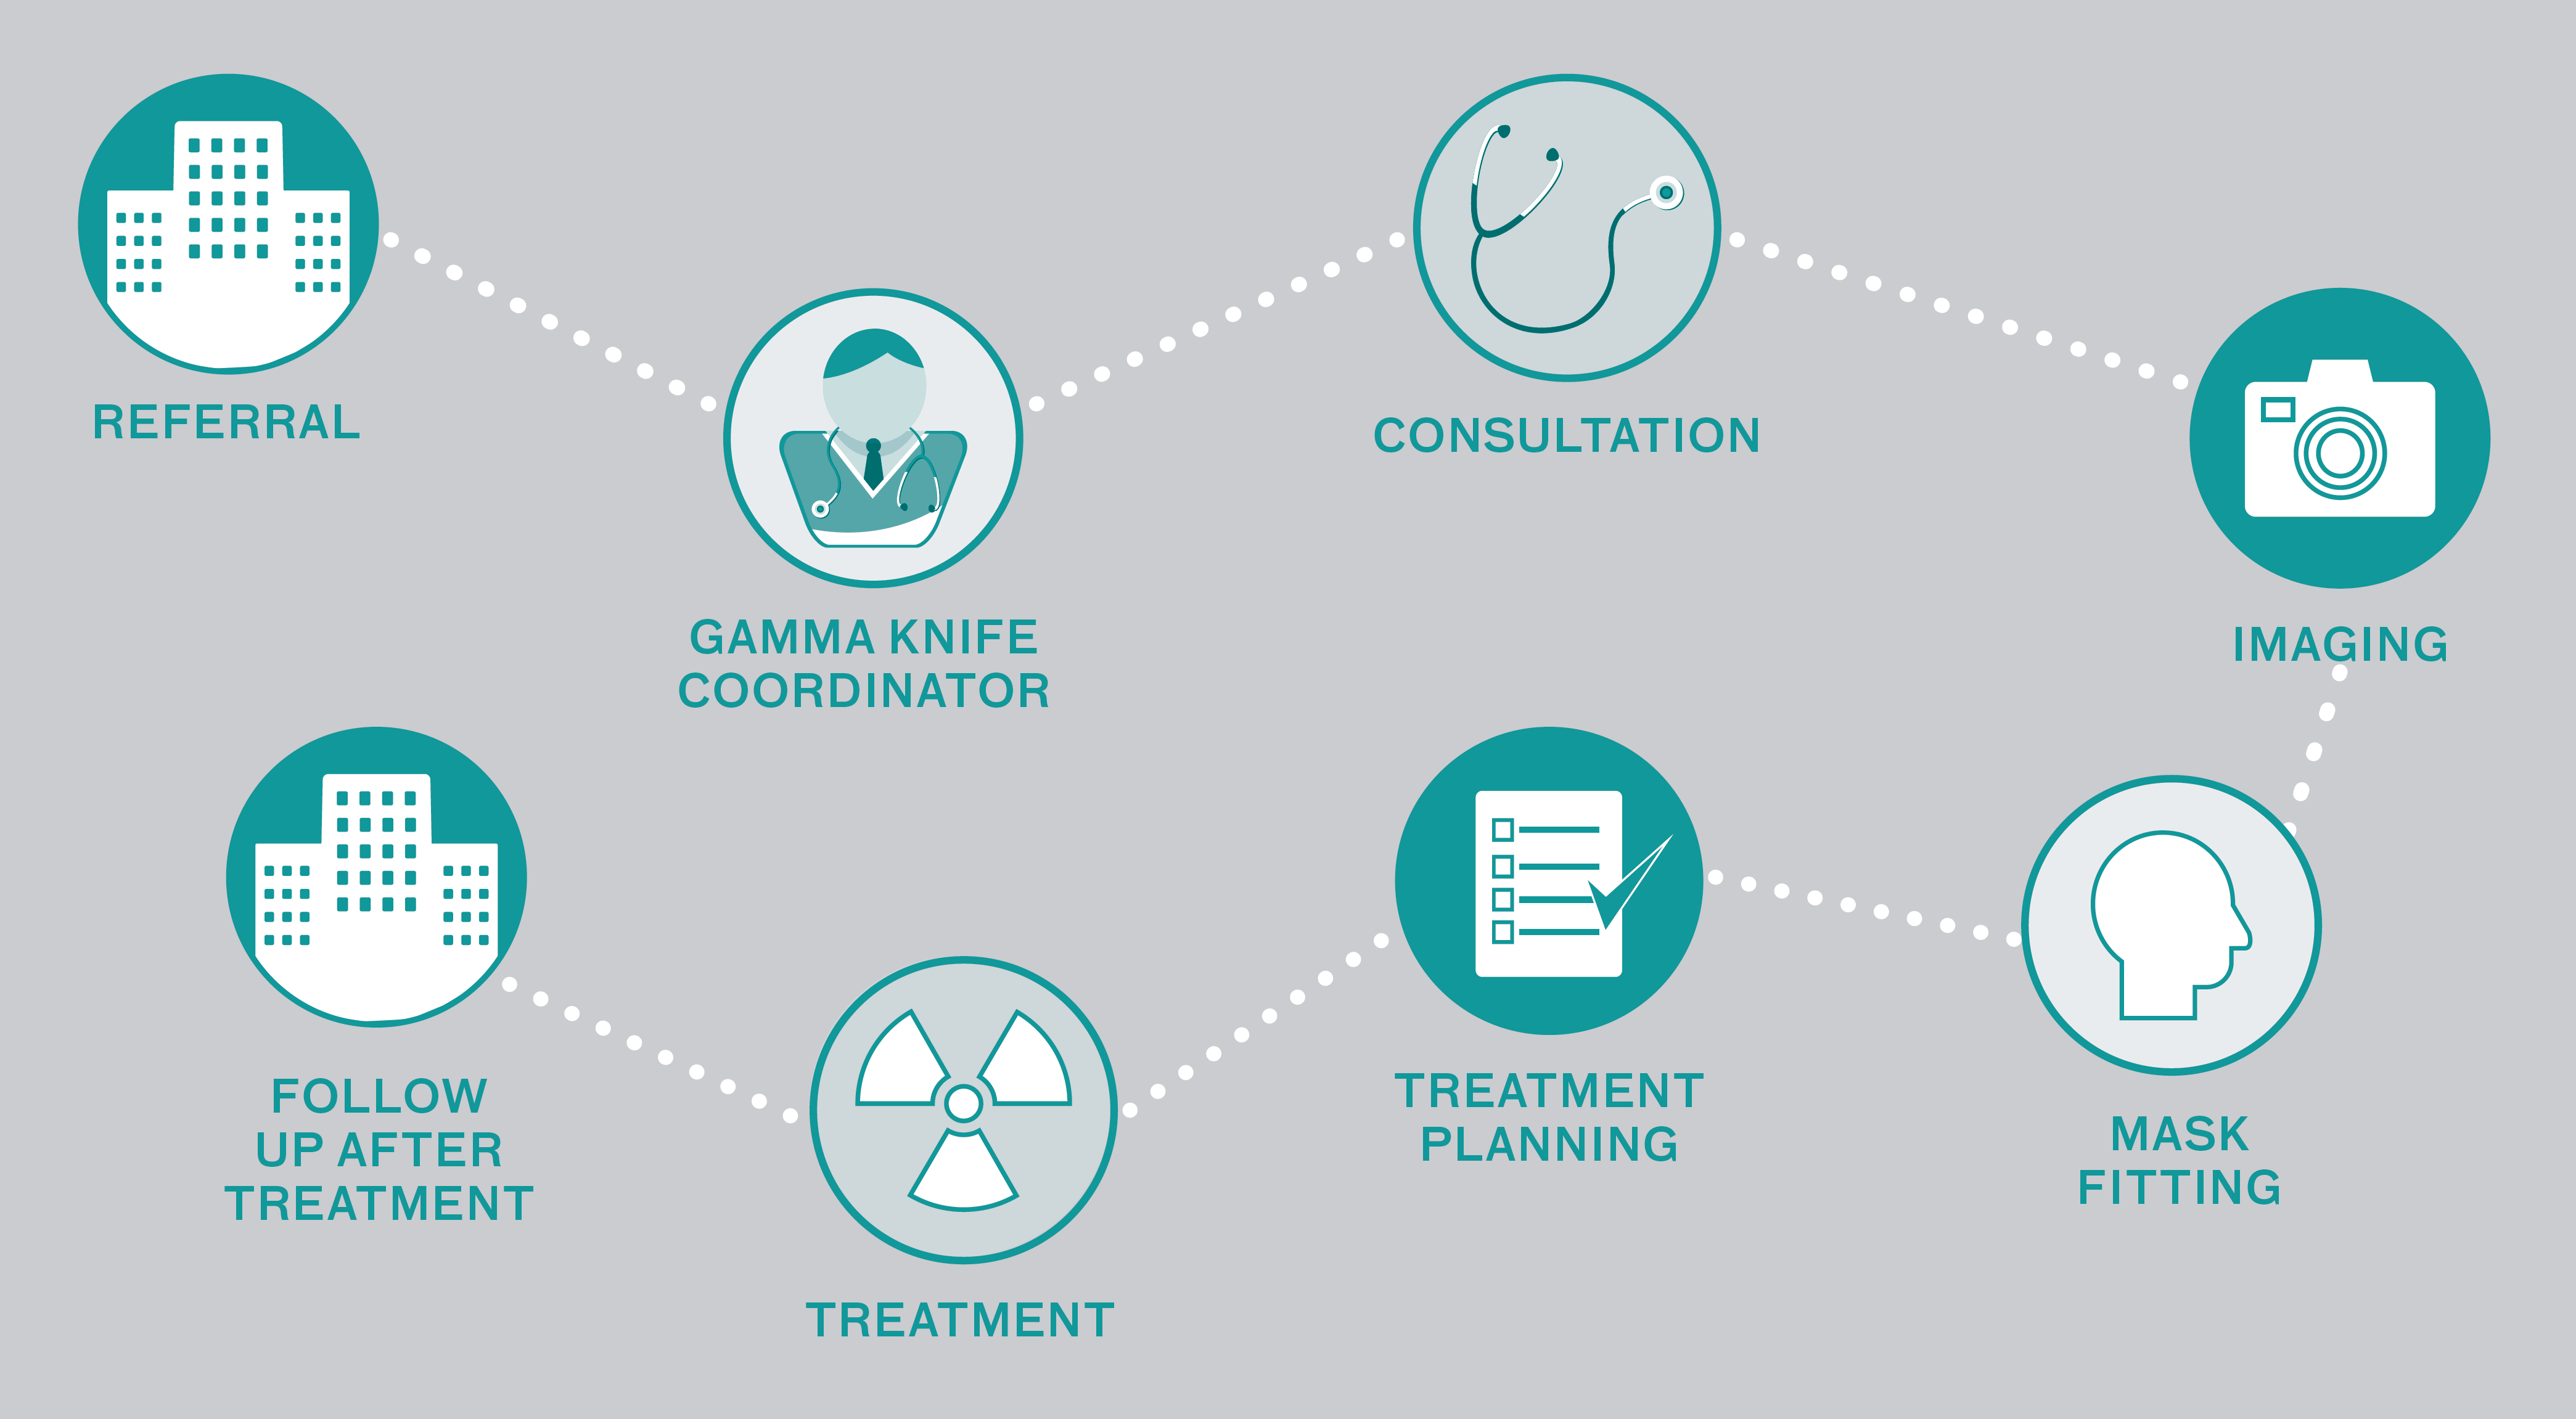 Patient experience process: Referral, Gamma Knife Coordinator, Consultation, Imaging, Mask Fitting, Treatment Planning, Treatment, Follow up after treatment.  